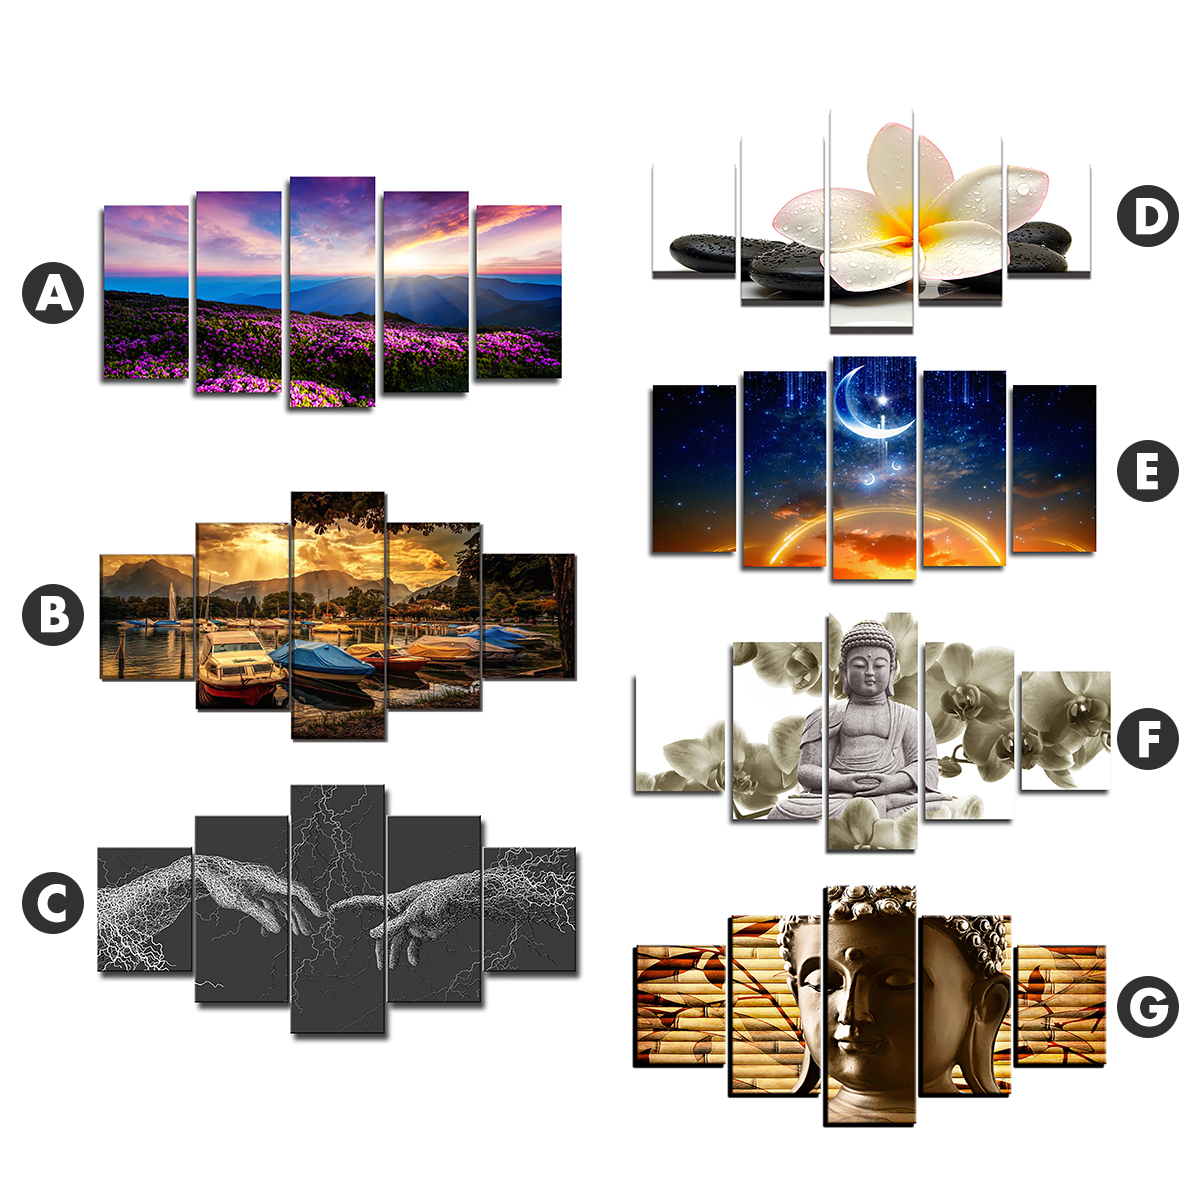 5Pcs-Canvas-Print-Paintings-Scenery-Oil-Painting-Wall-Decorative-Printing-Art-Picture-Frameless-Home-1758668-2